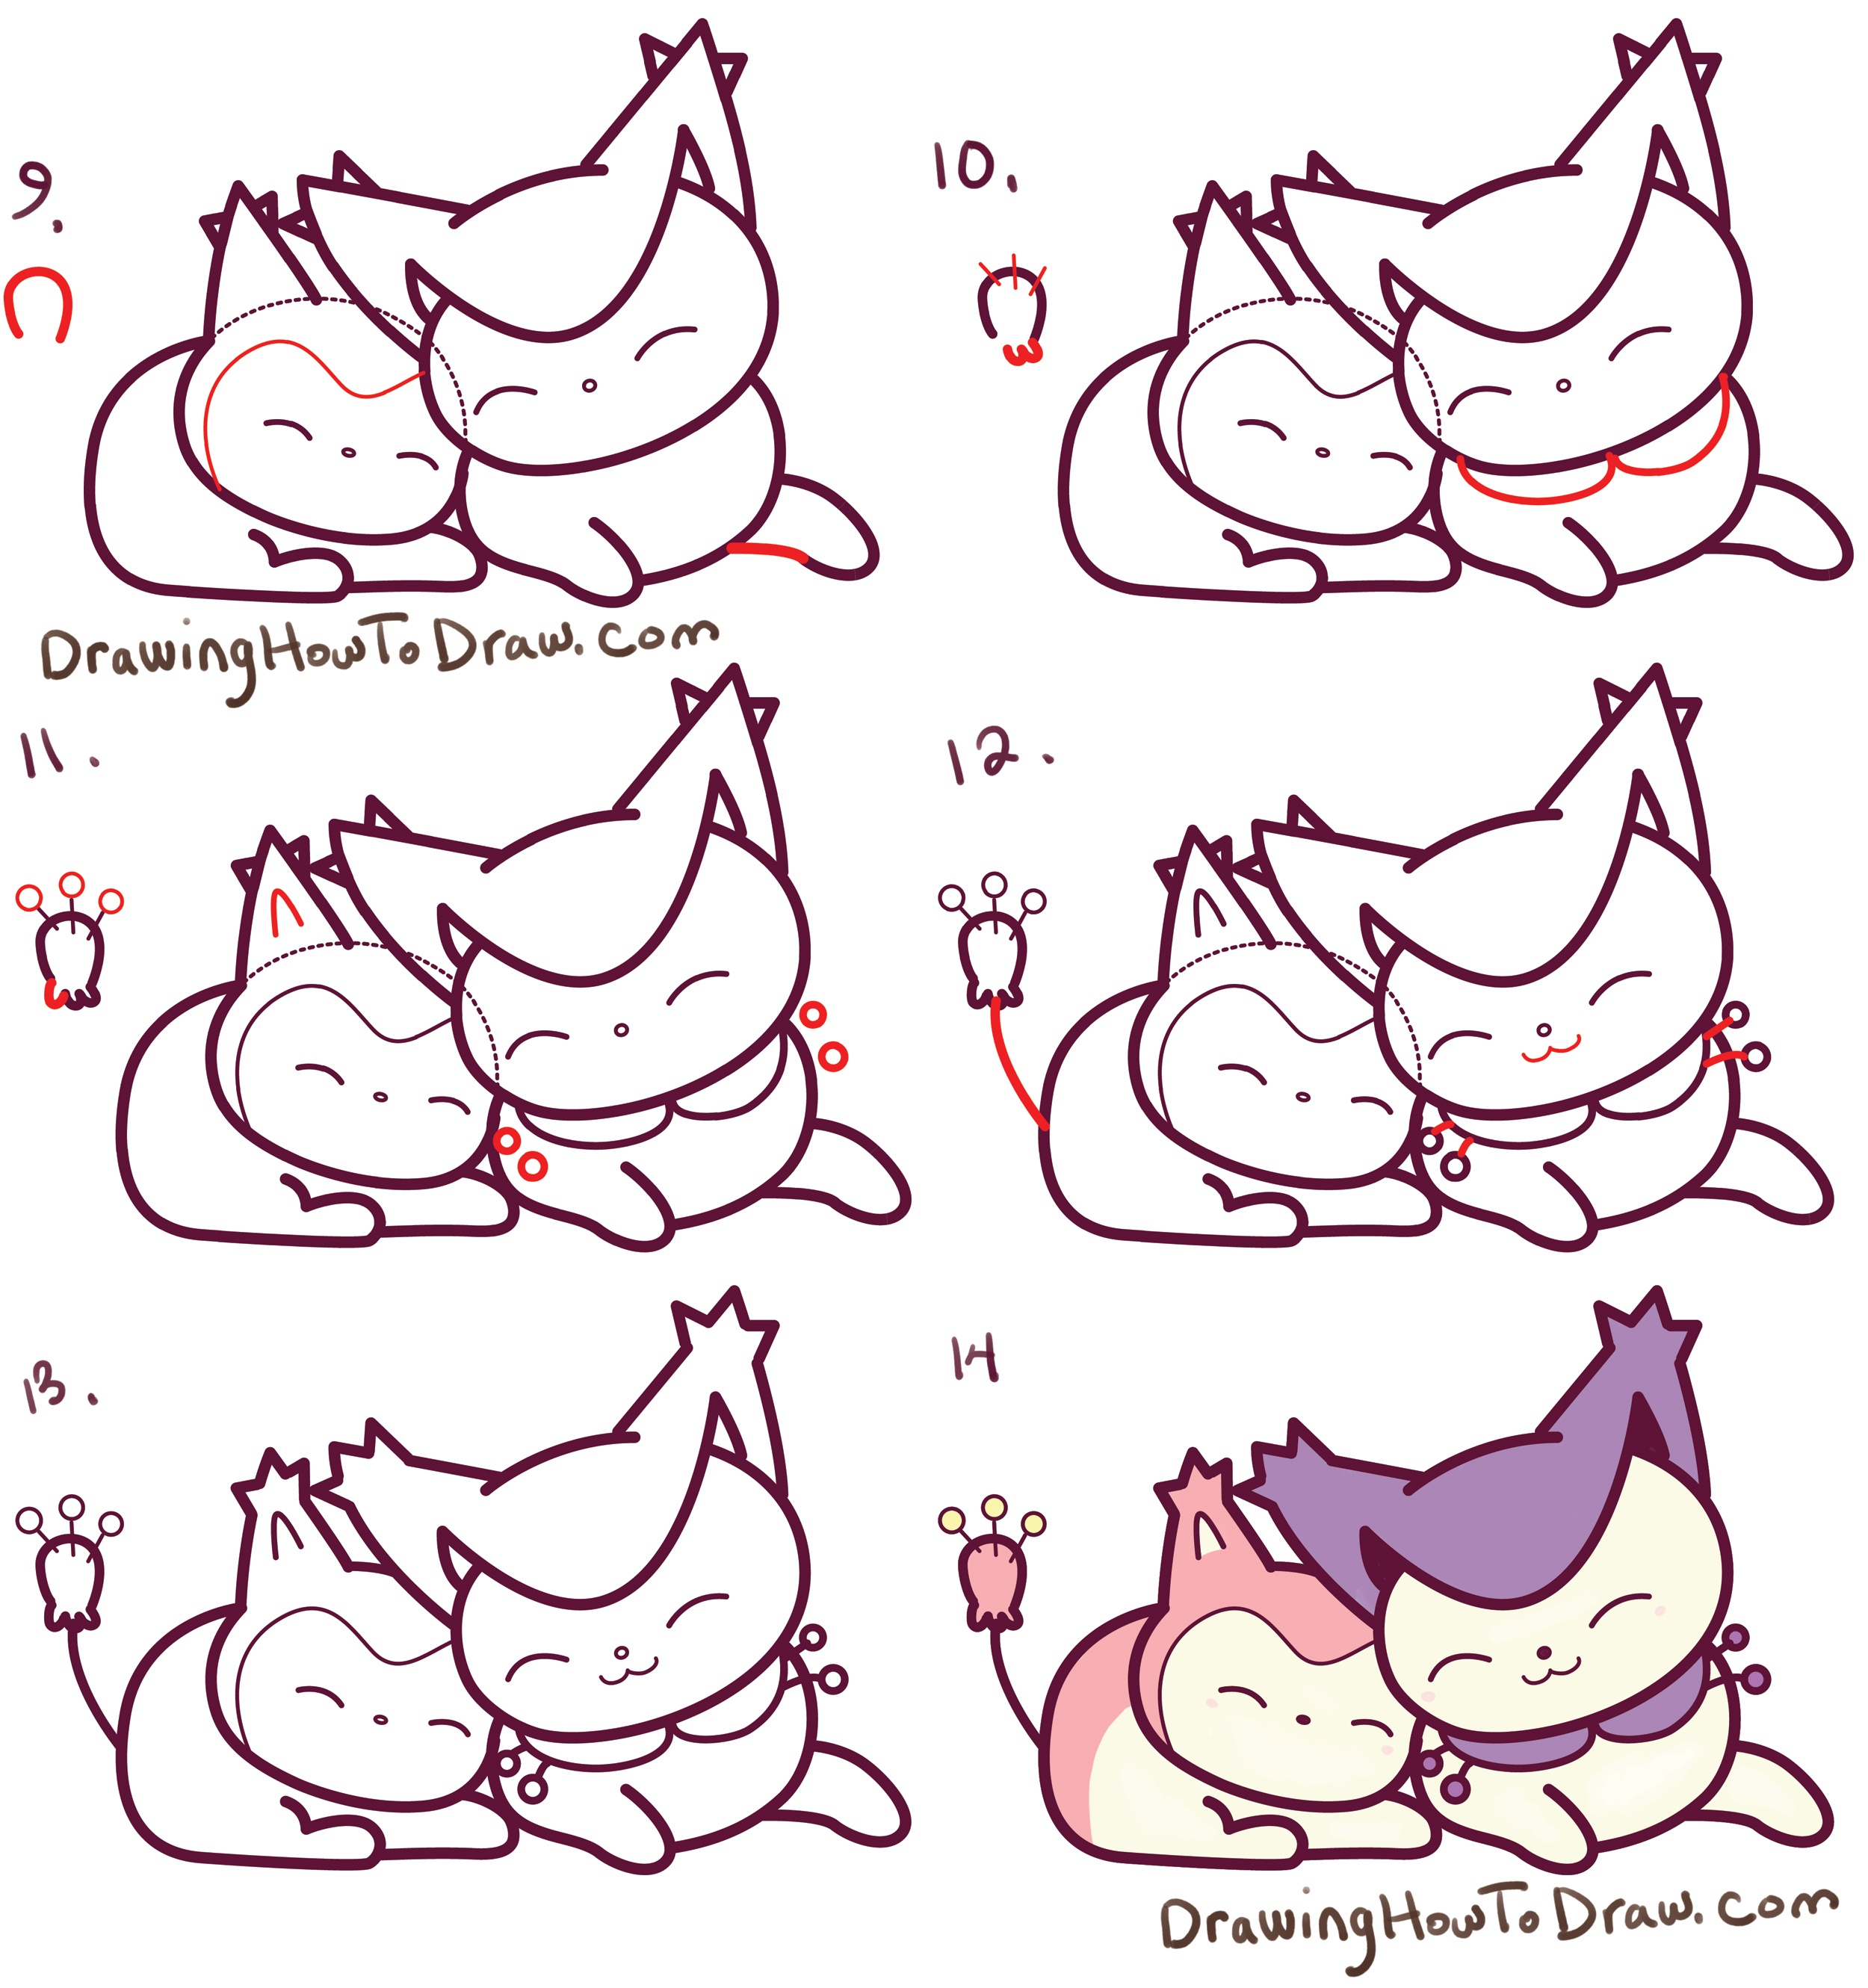 How to Draw Delcatty and Skitty (cute / kawaii / chibi) with Simple Step by Step Drawing Tutorial for Kids